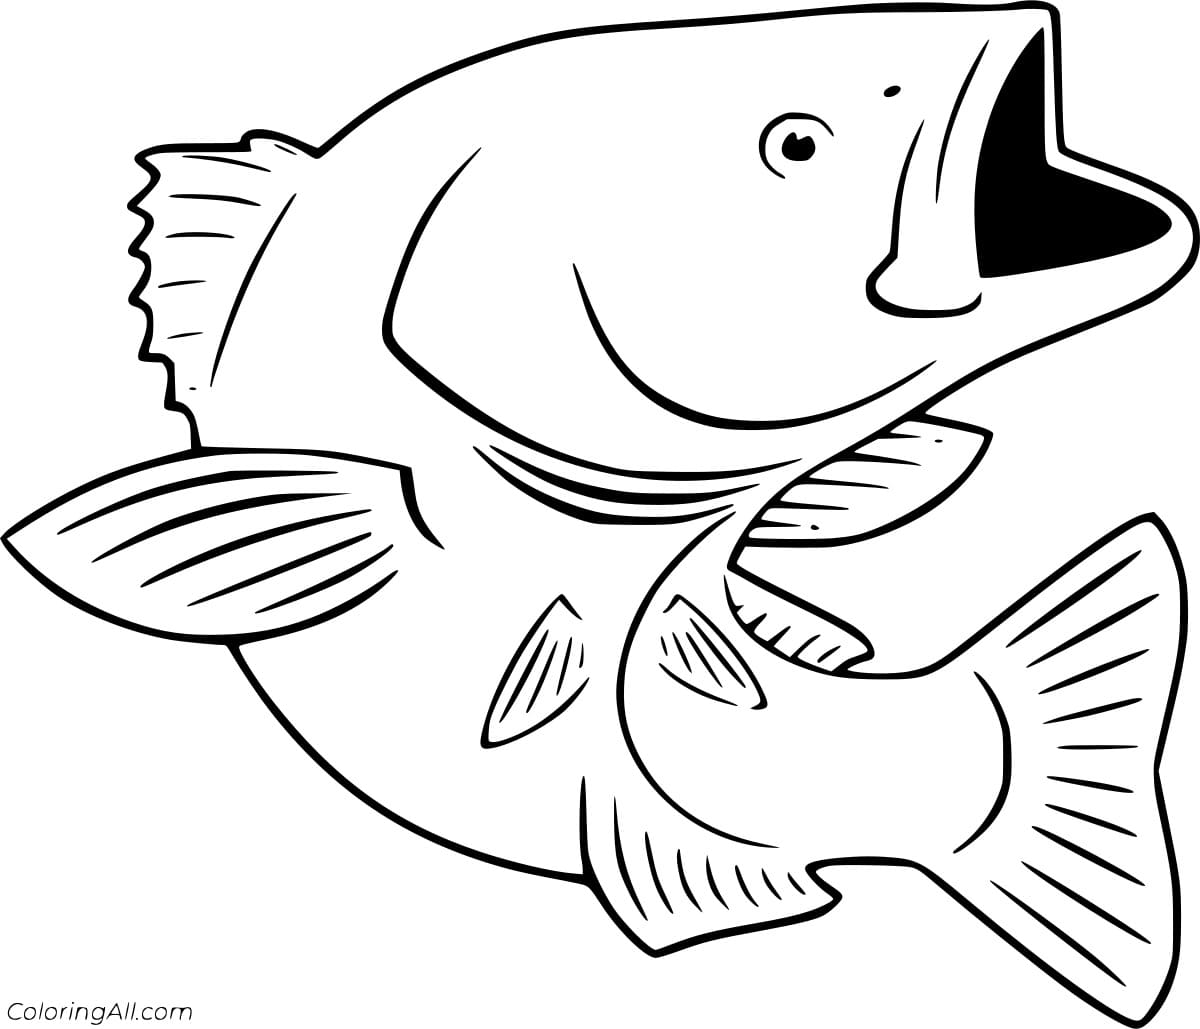 Jumping Bass Image Coloring Page